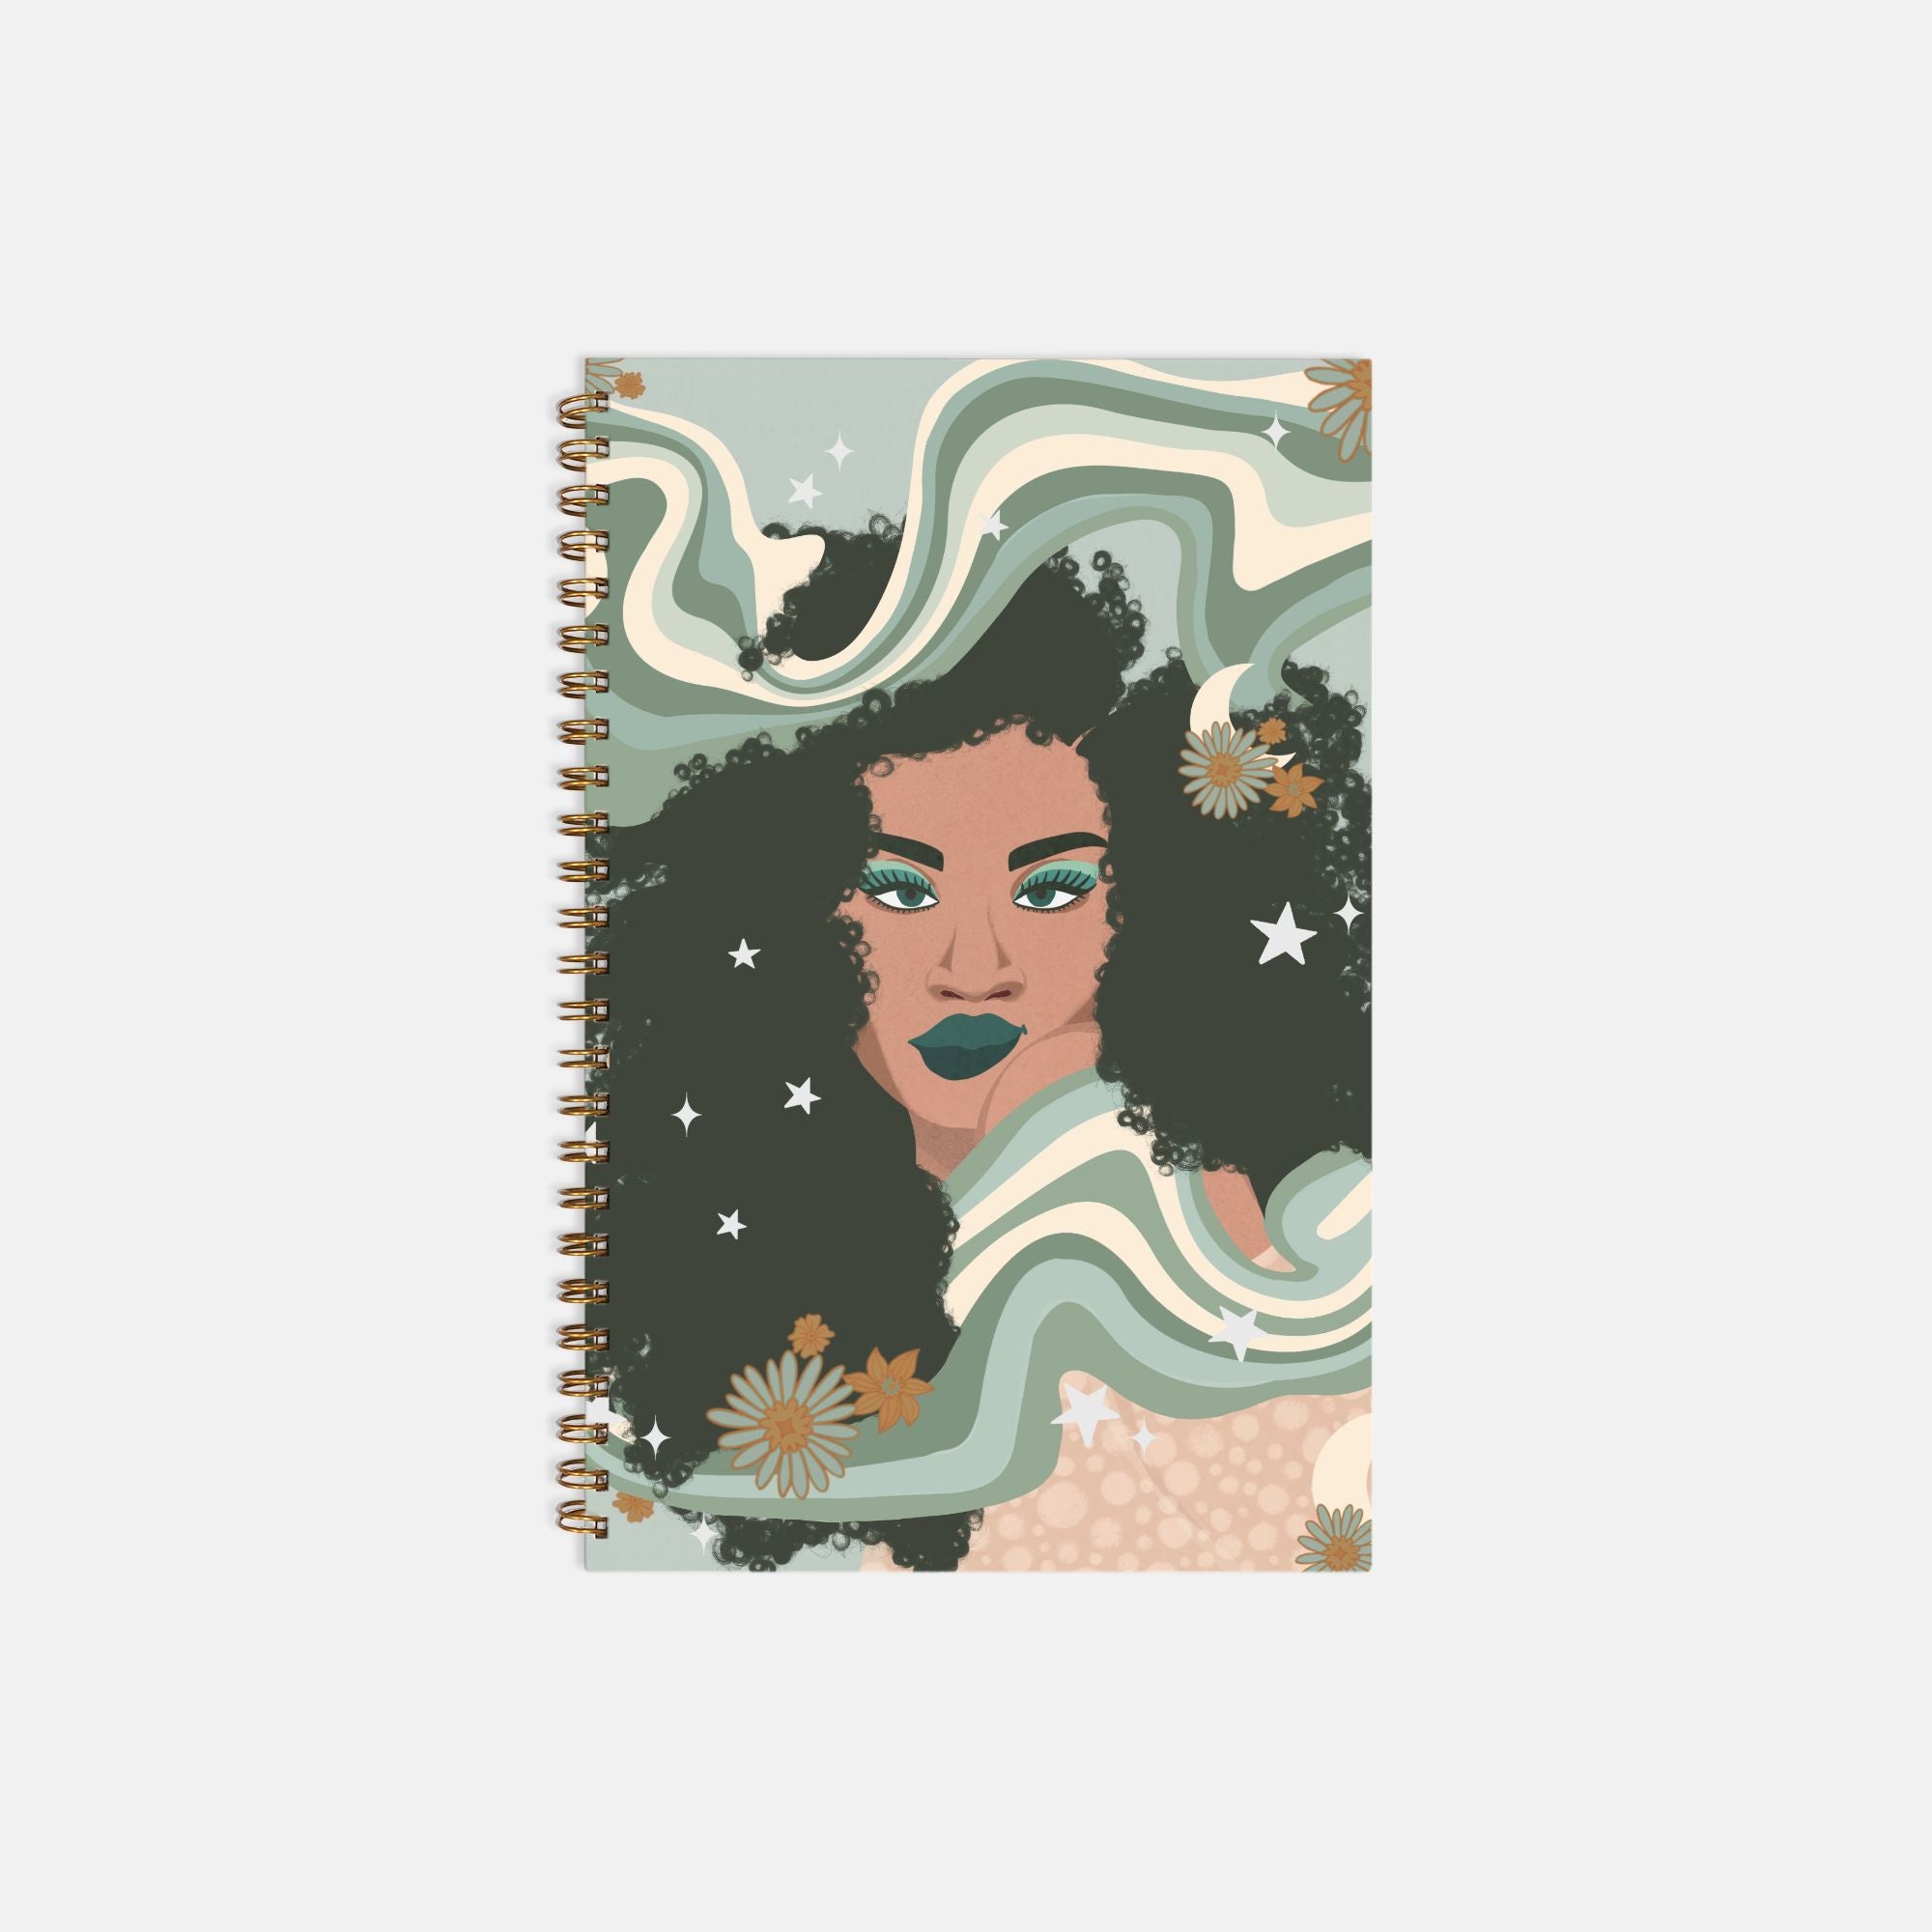 Green Ivy Notebook Hardcover